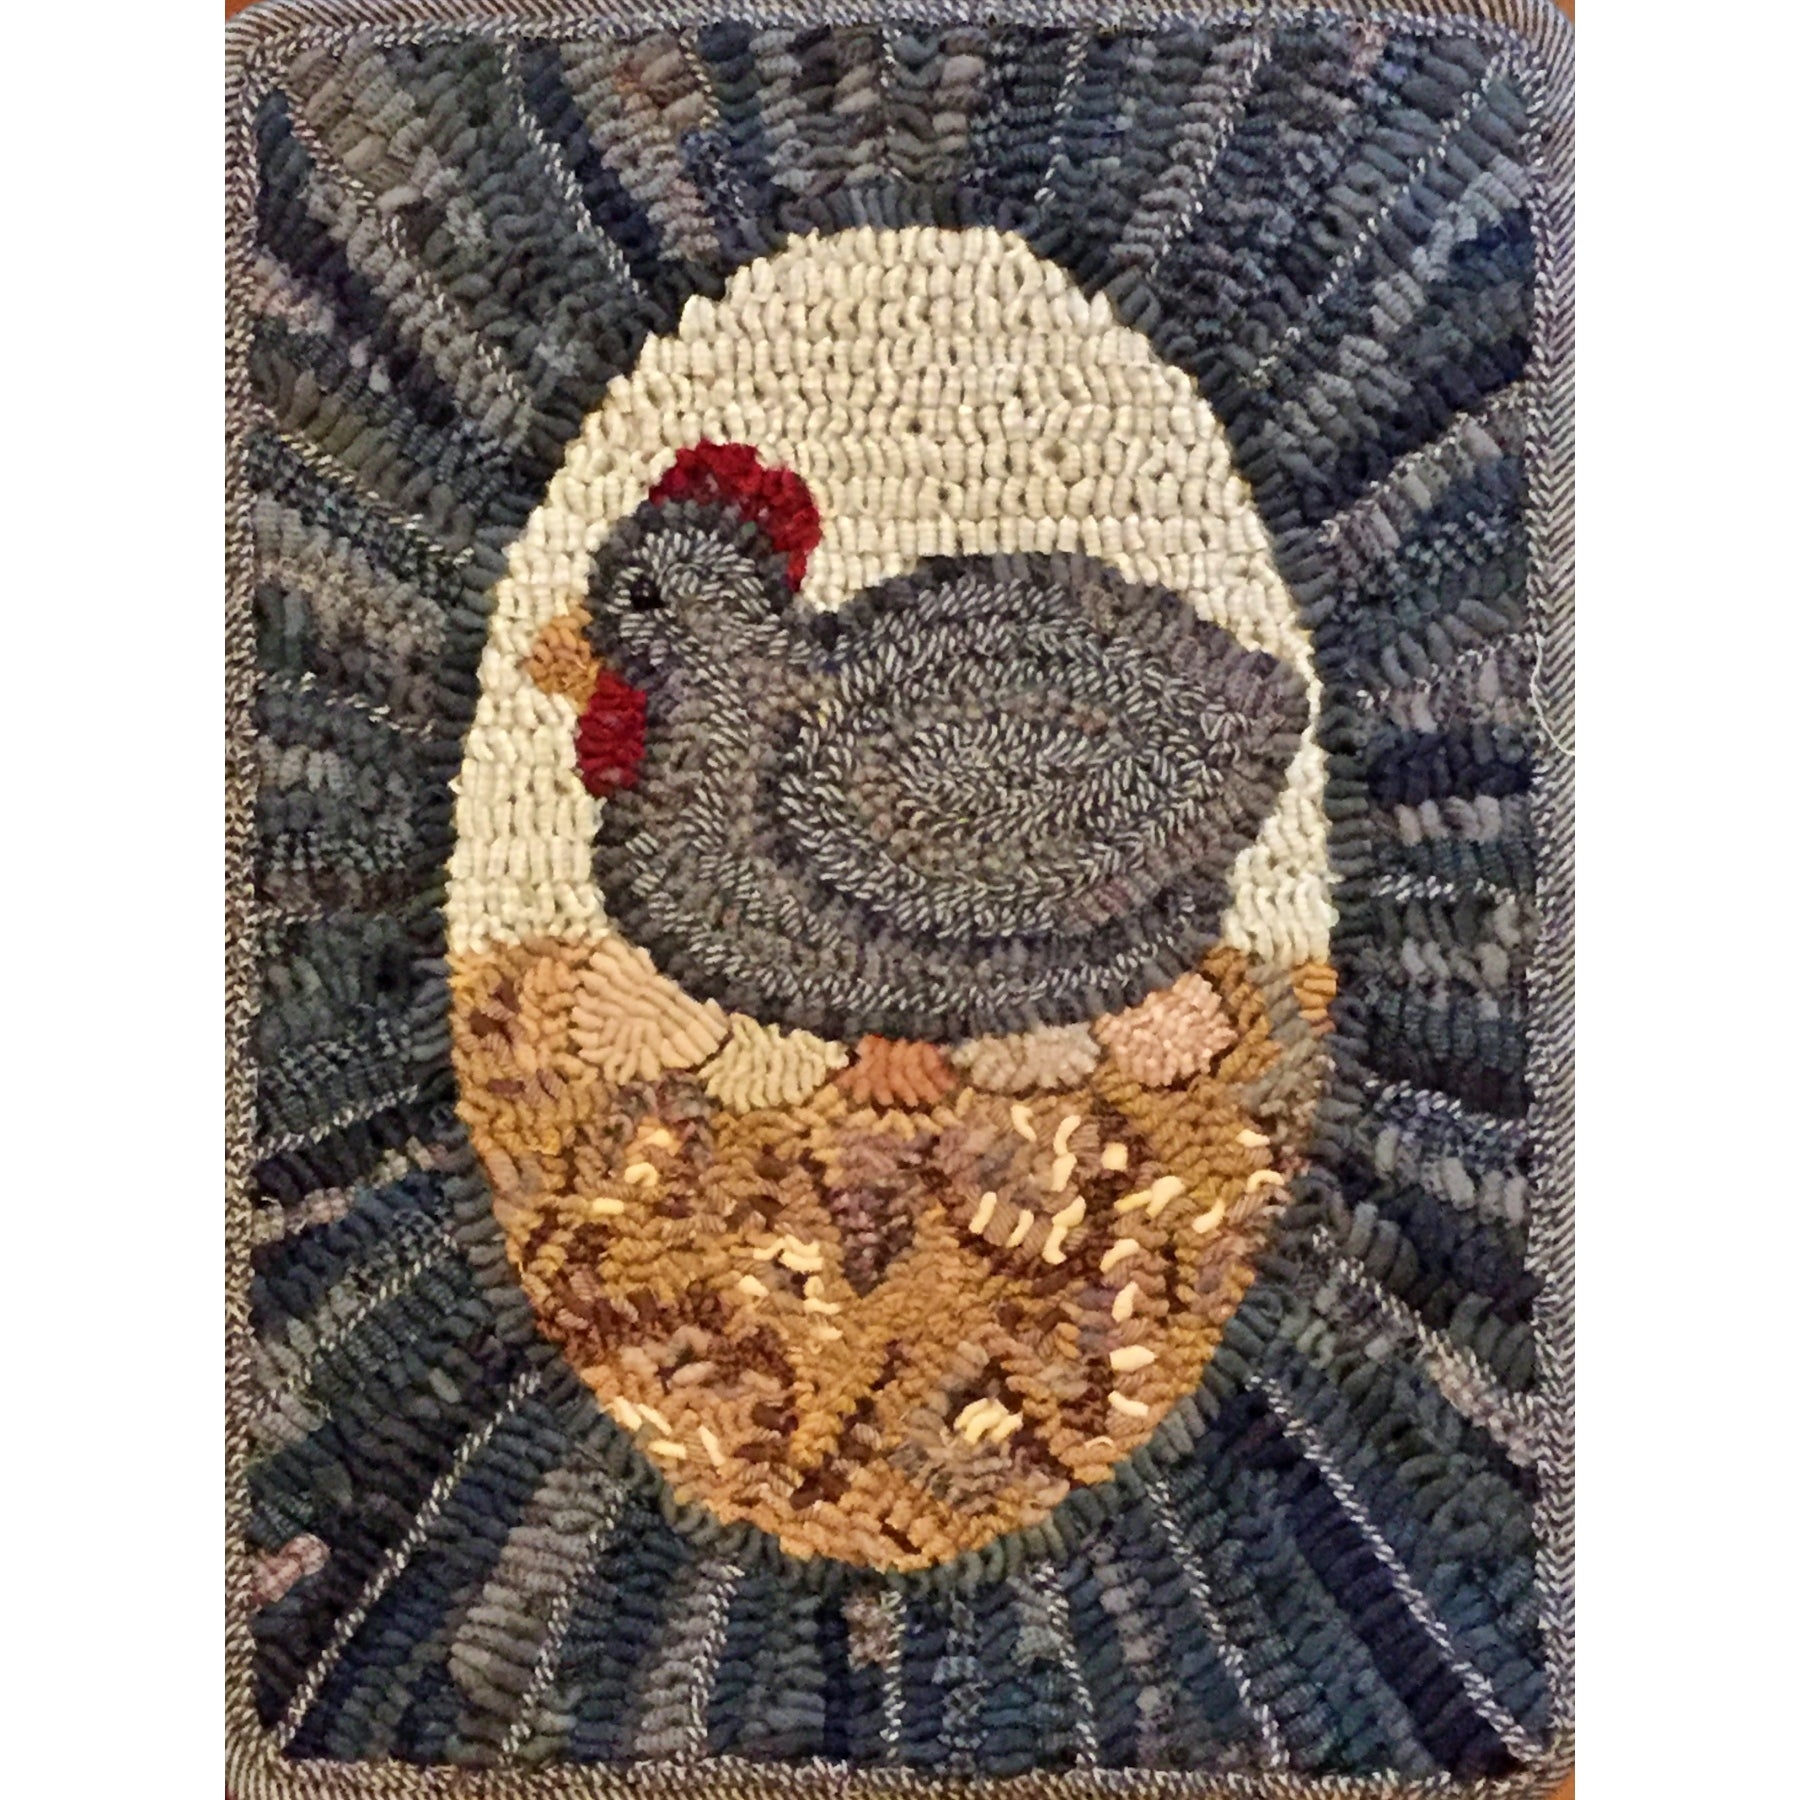 Nest Eggs, rug hooked by Christa Bowling